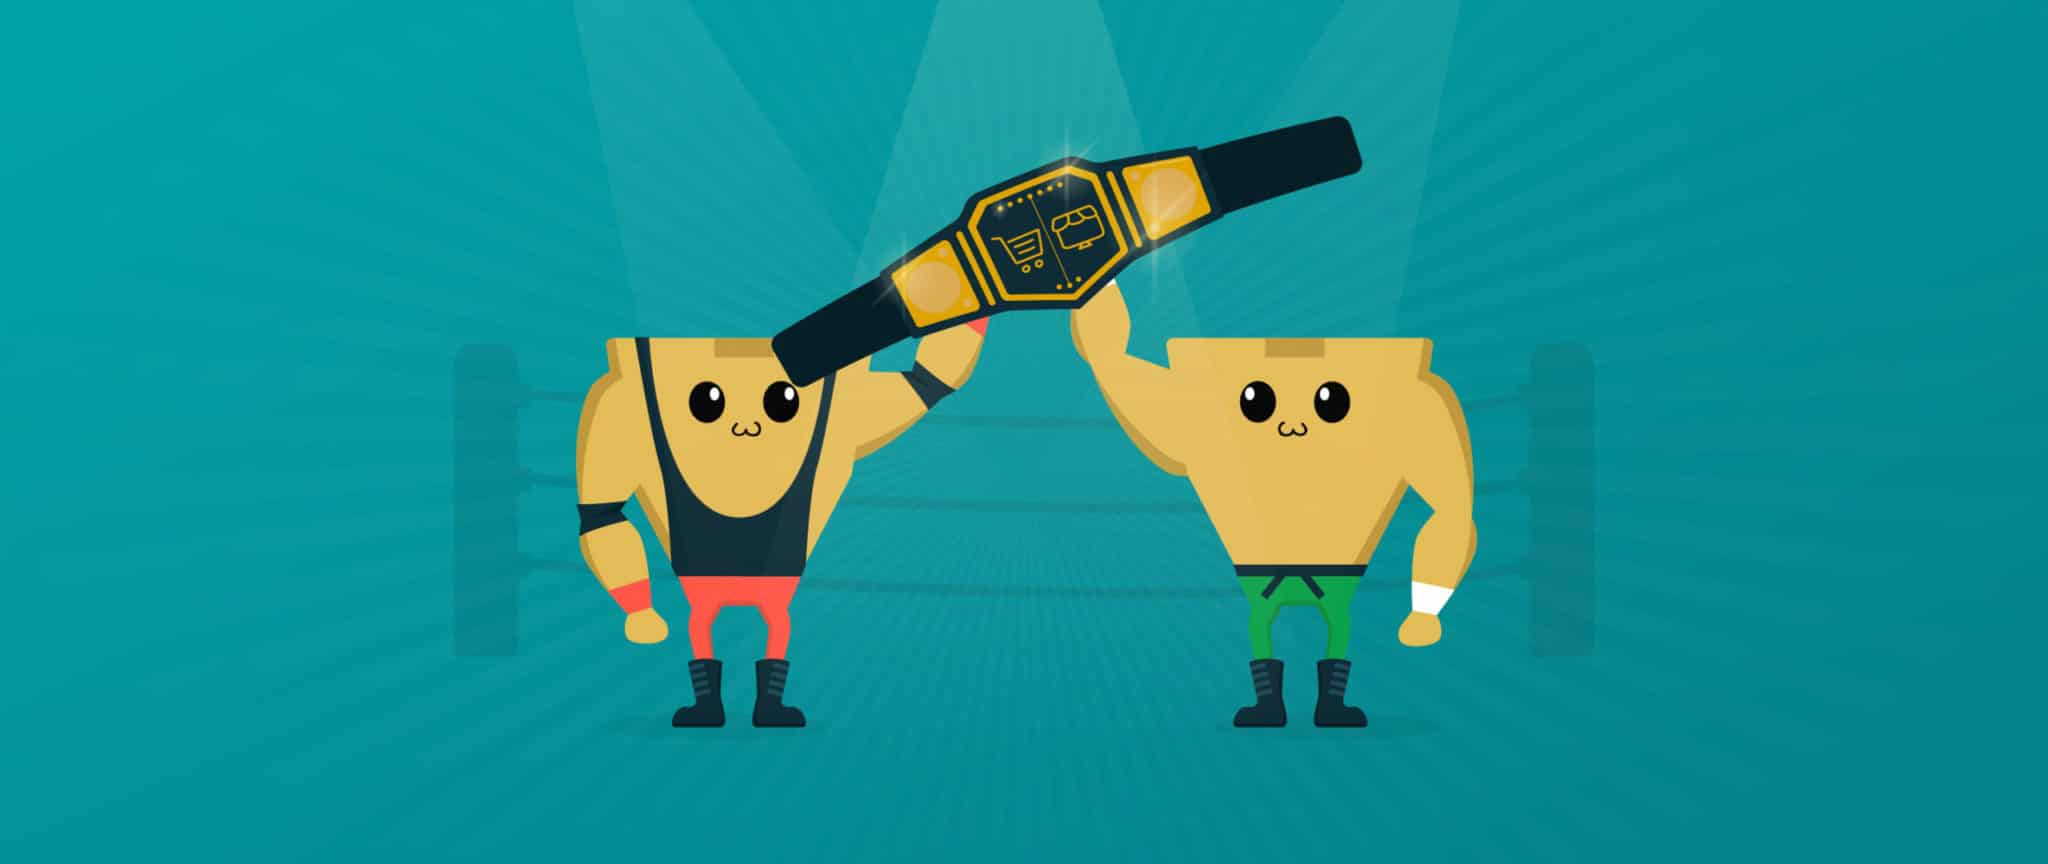 Two box wrestlers hold up a championship title in the battle between shopping carts and marketplaces.